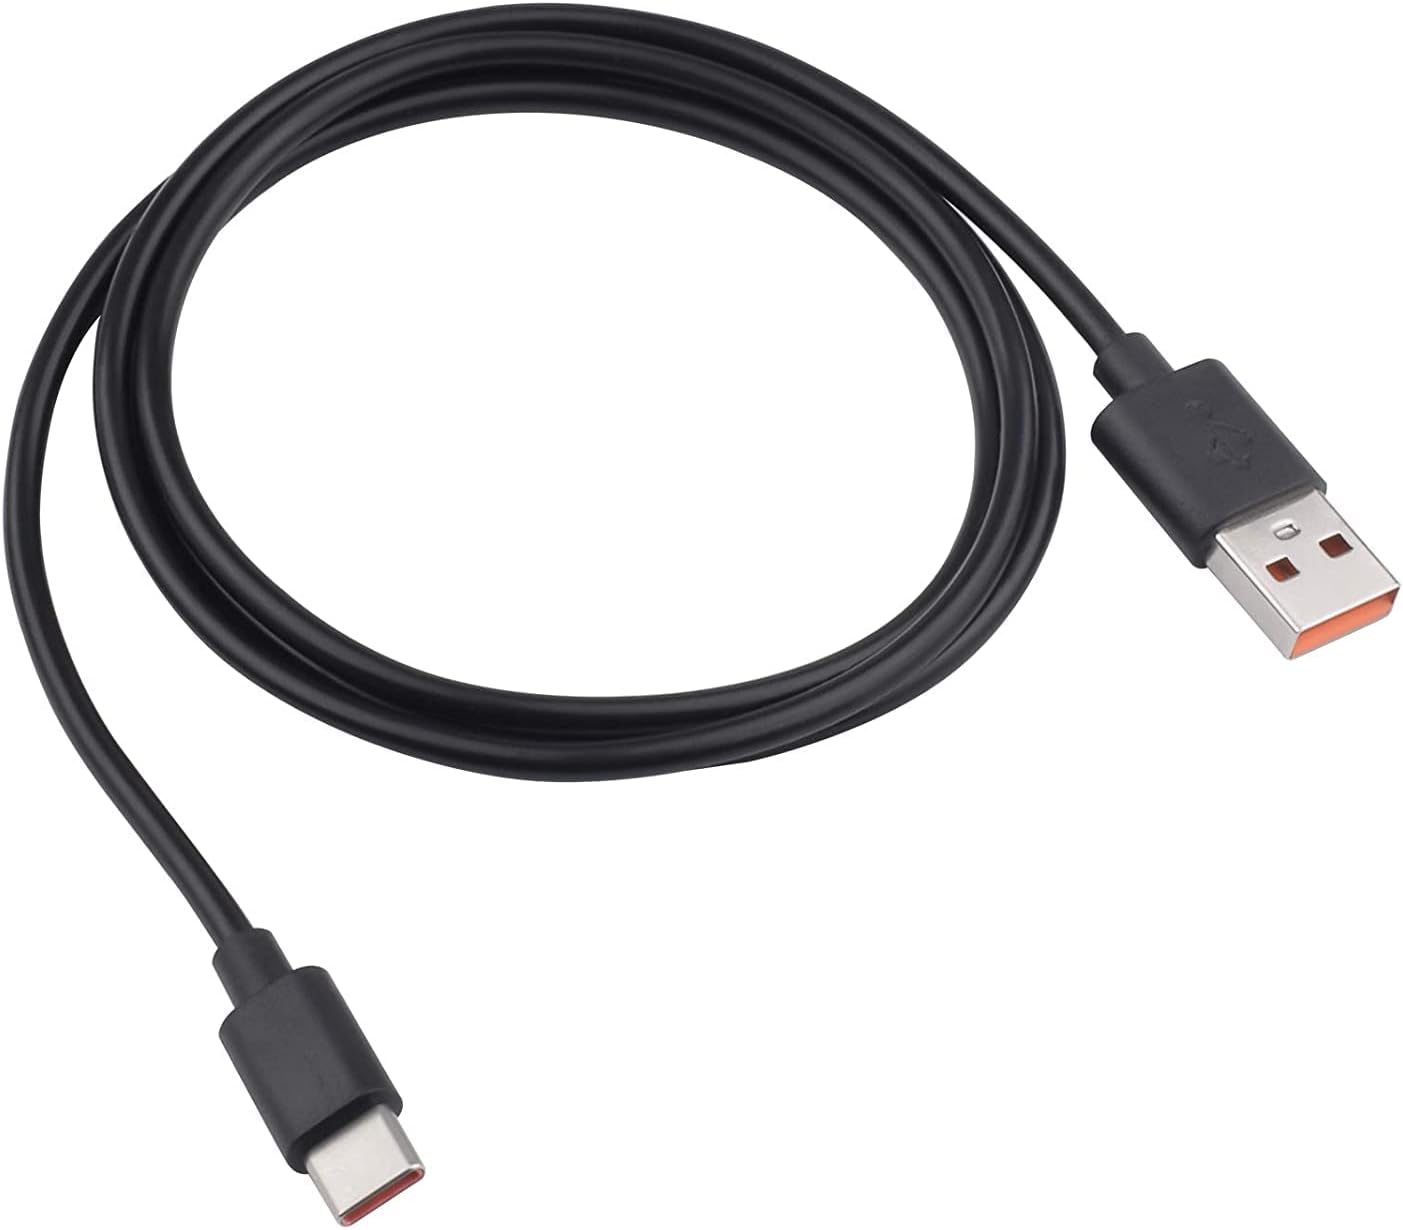 CABLE USB TIPO C  XBOX SERIES X 1.8 MTS